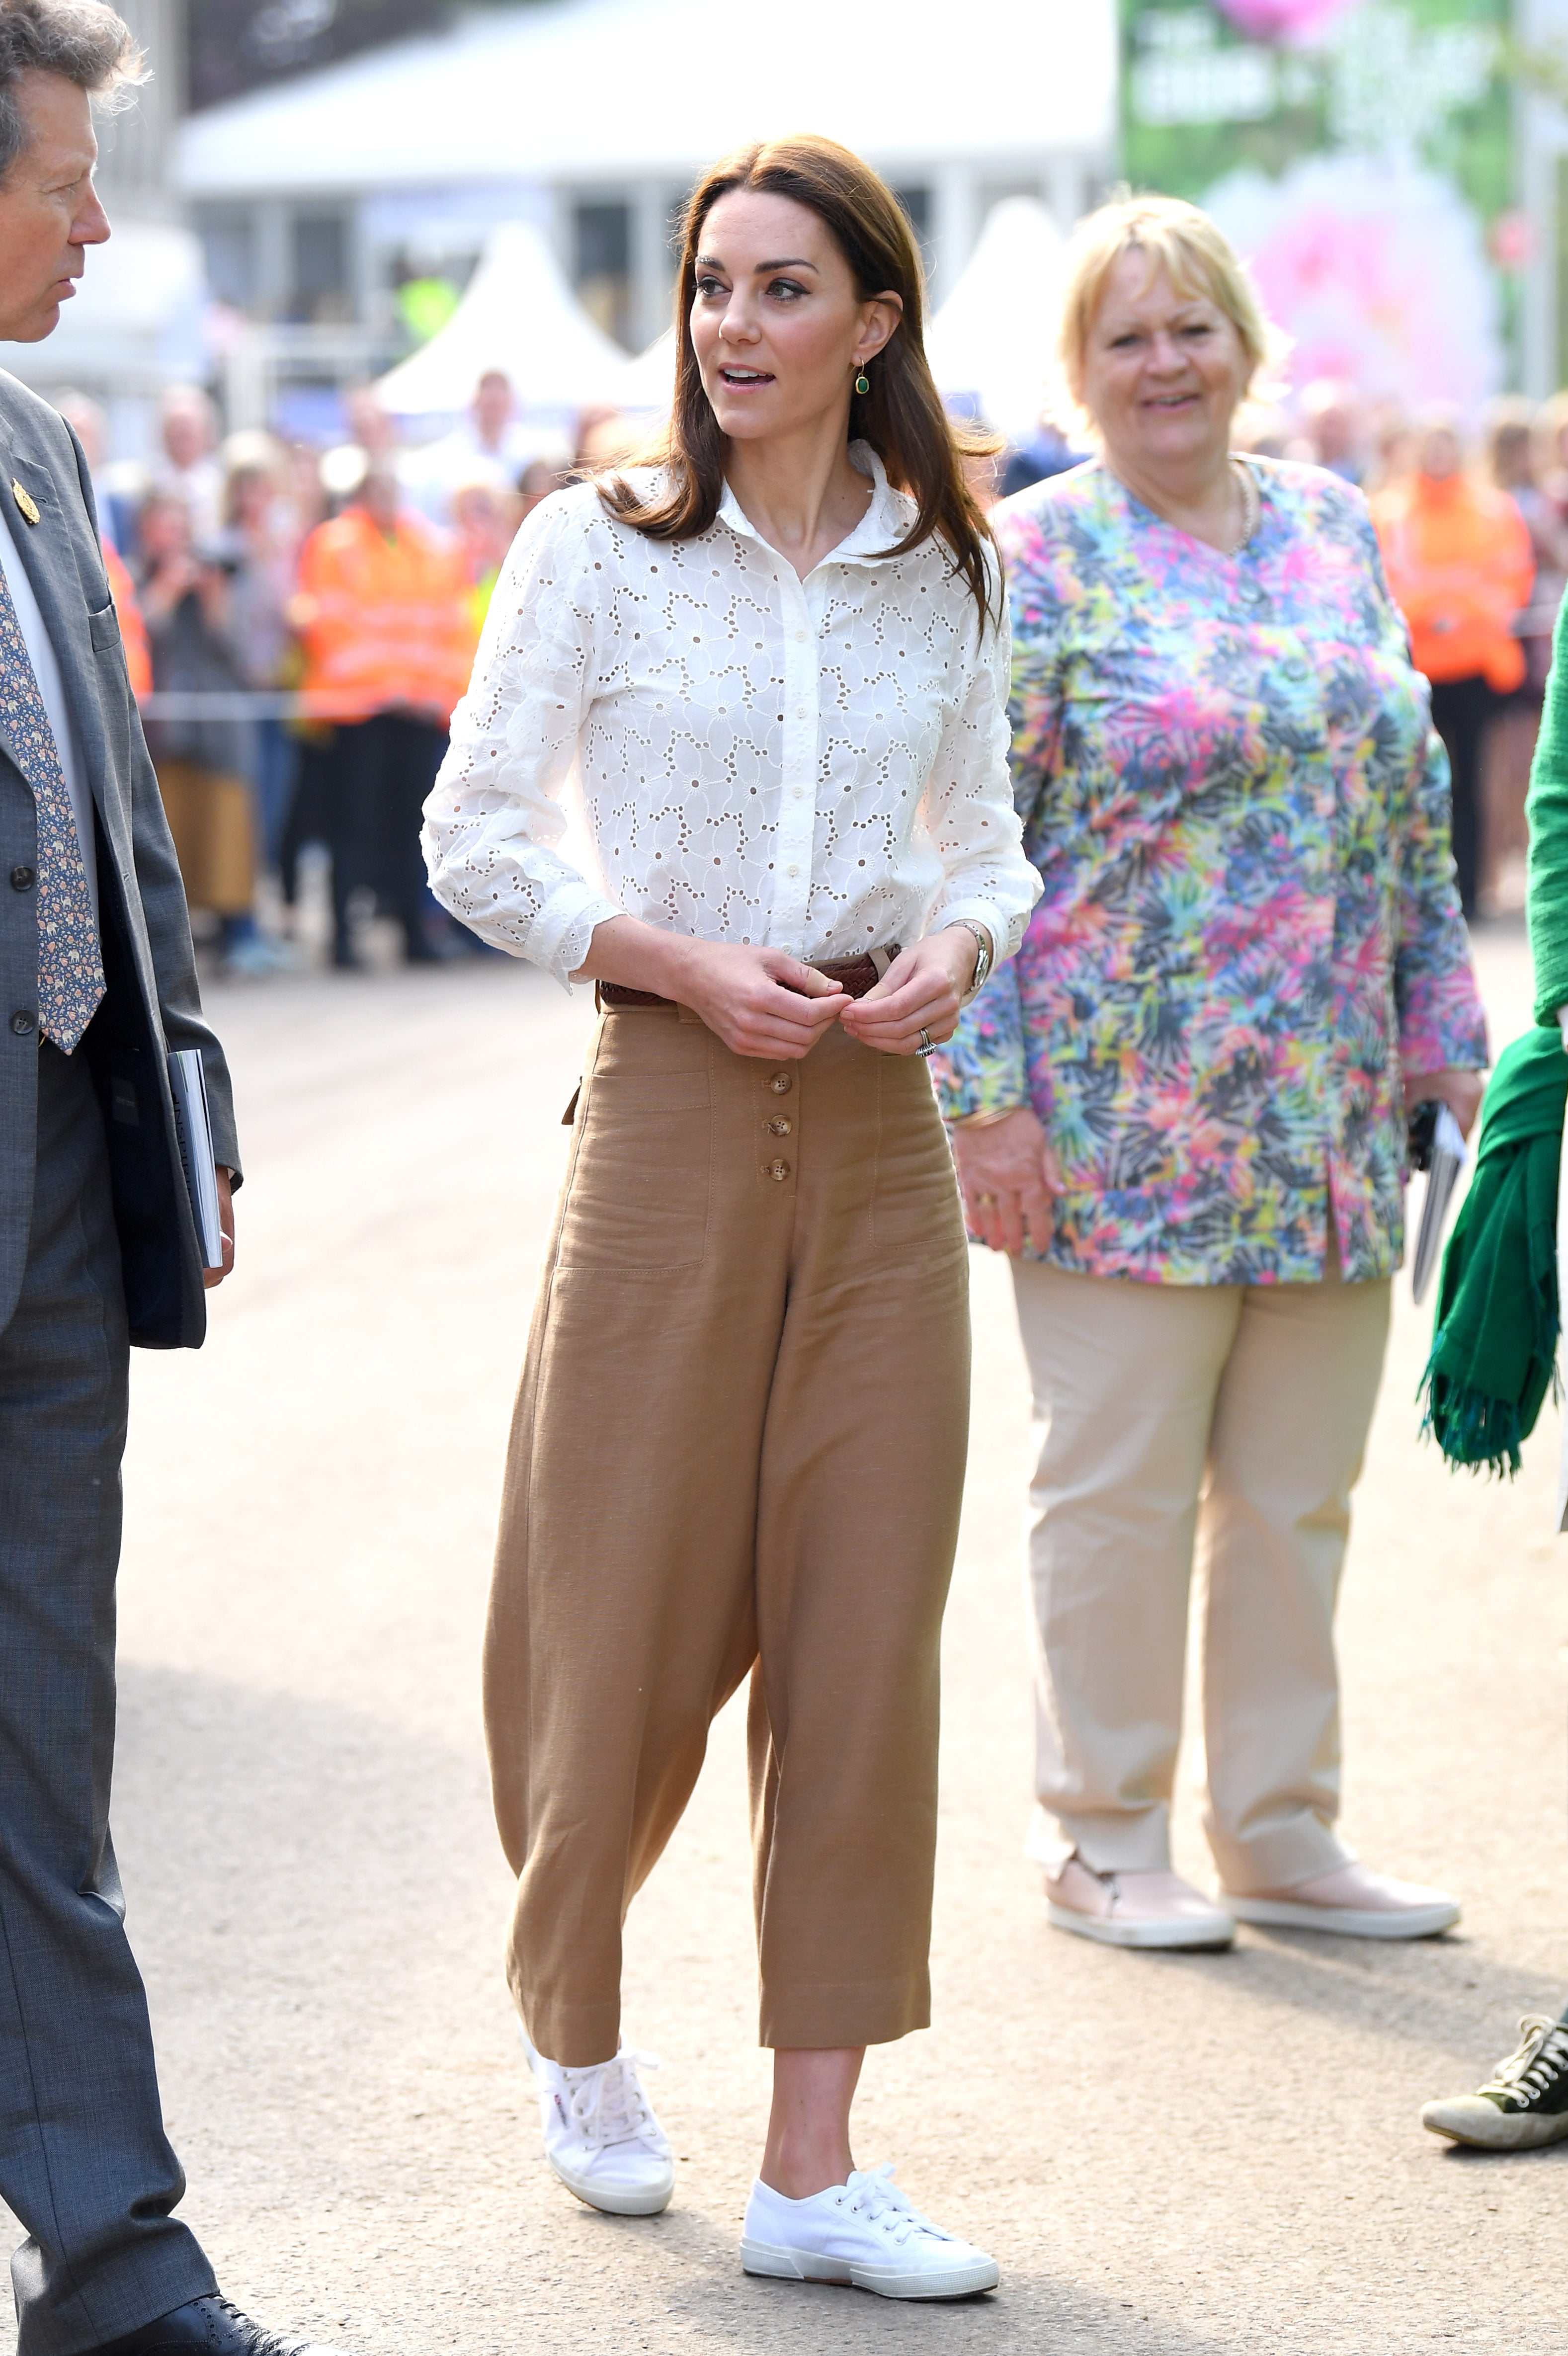 Kate made sailor pants stylish again when she wore this monochrome